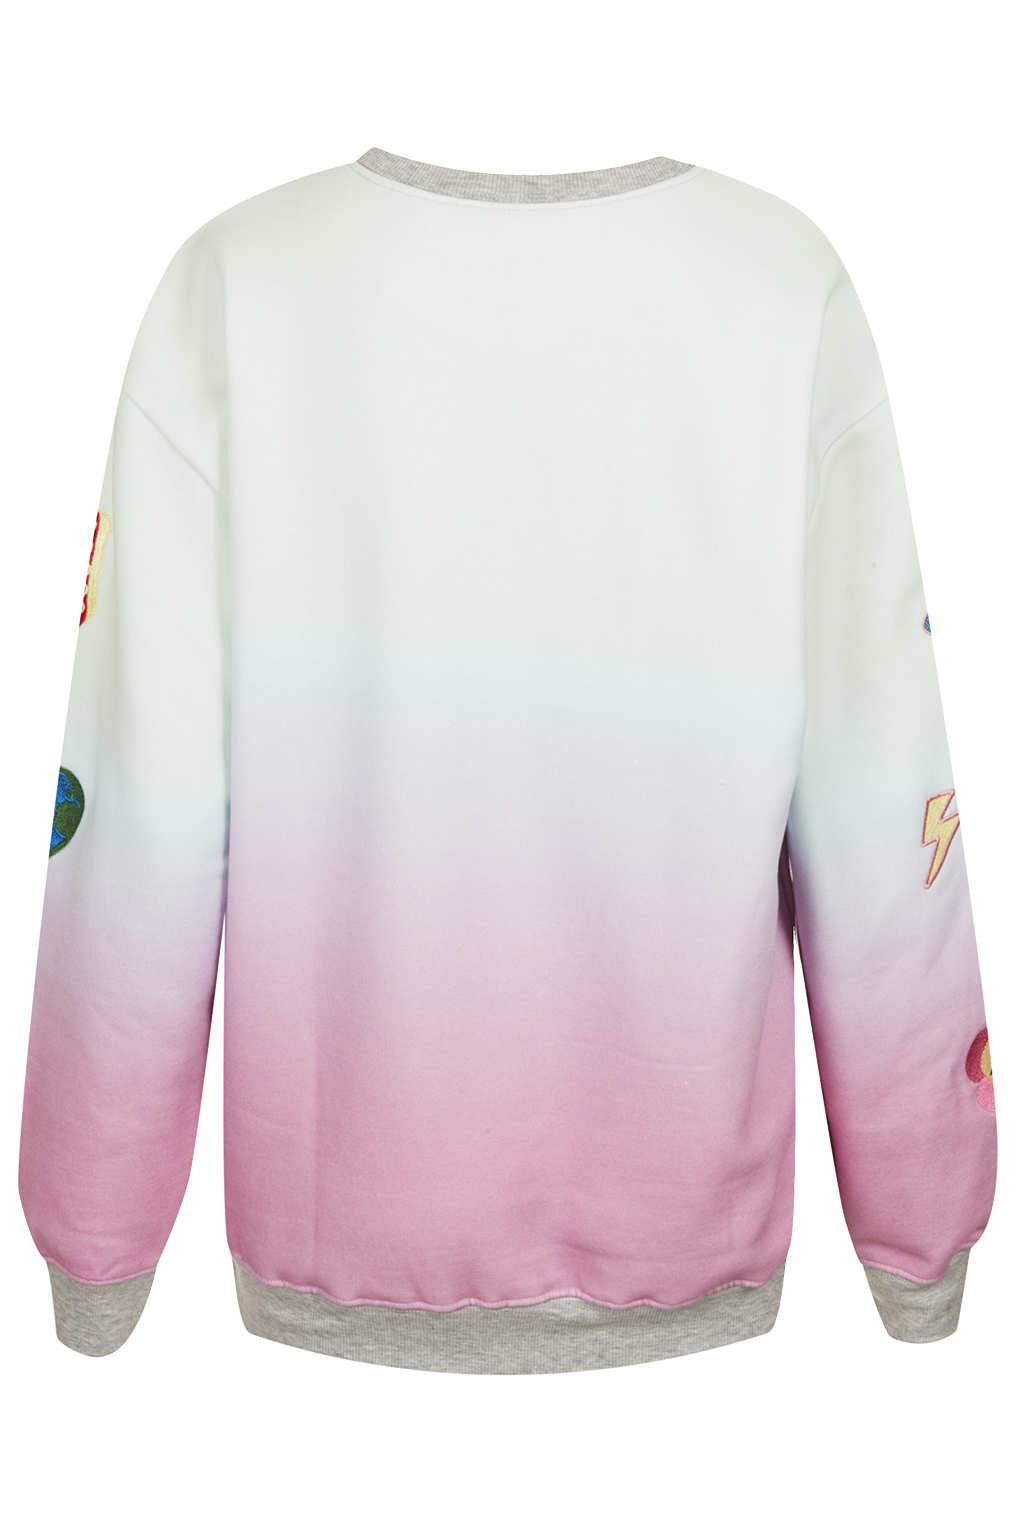 Lyst  Topshop Unicorn Sweat By Tee and Cake